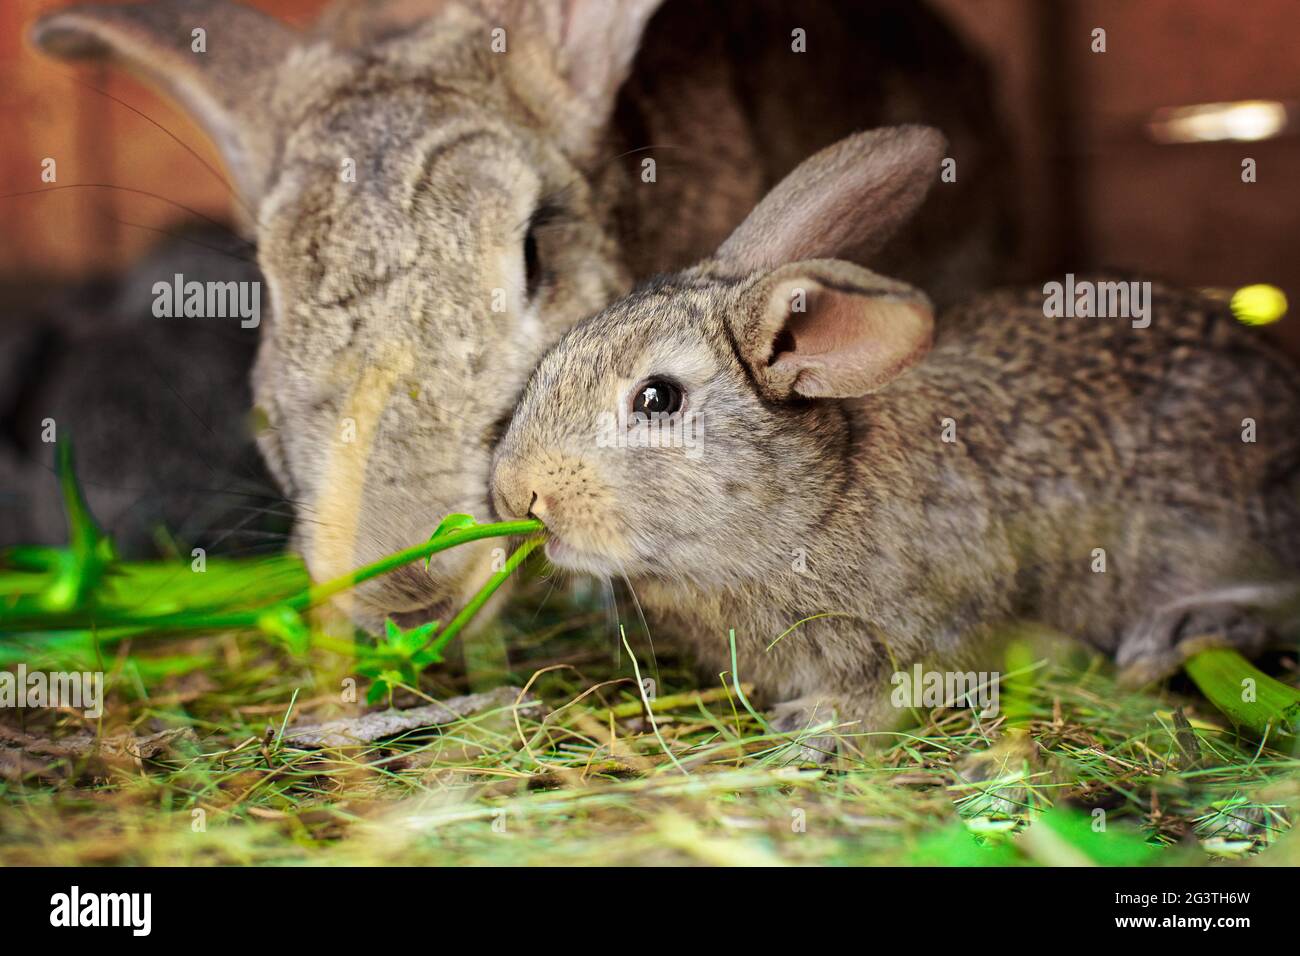 A small grey rabbit next to my mother. Touching animal relationships. Stock Photo